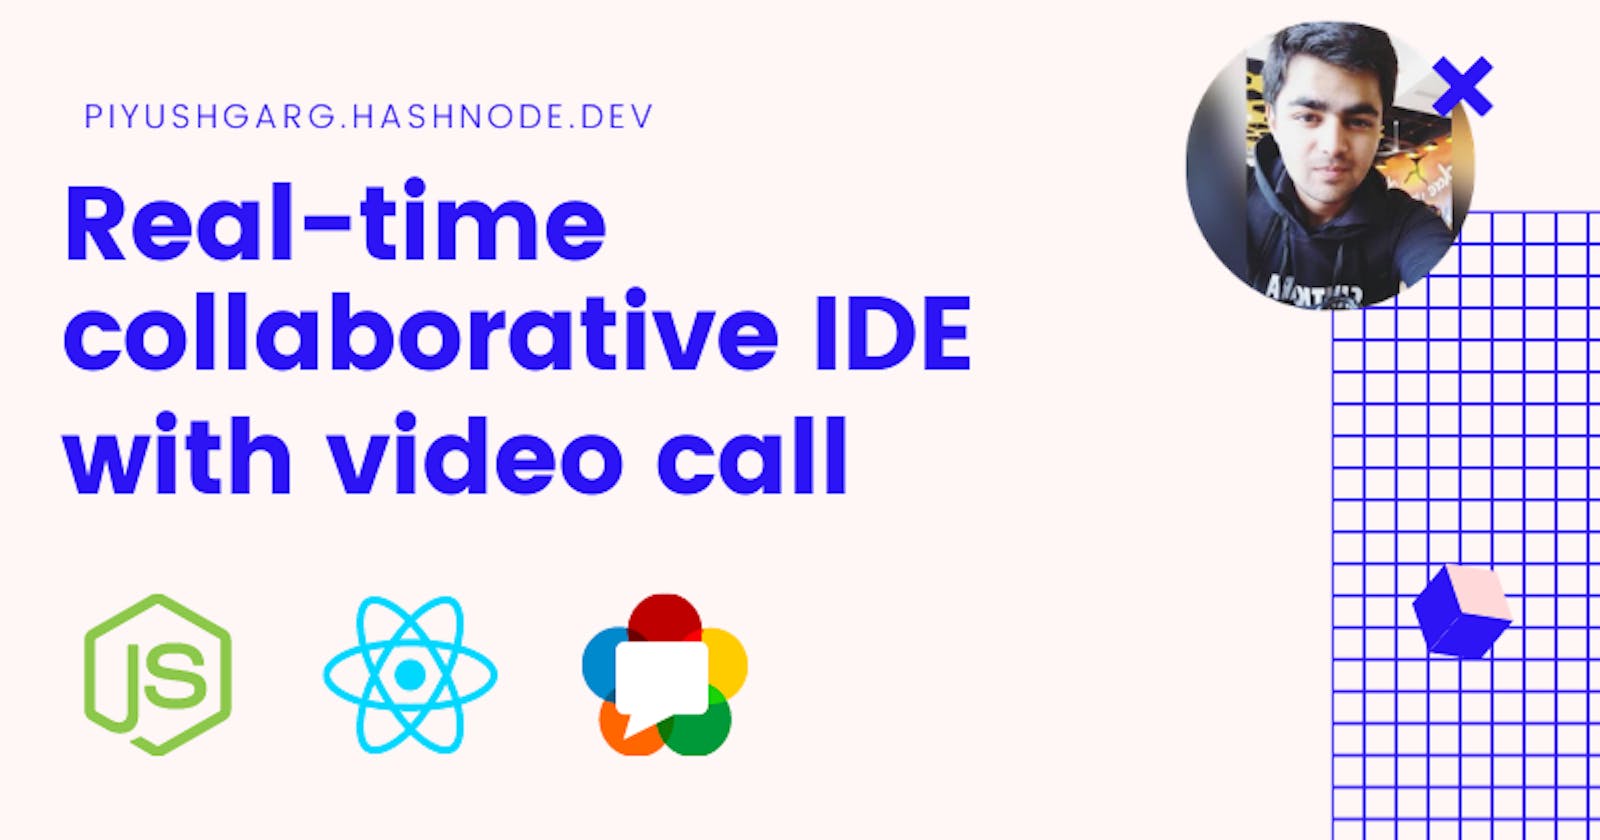 How I built a real-time collaborative IDE with video chat